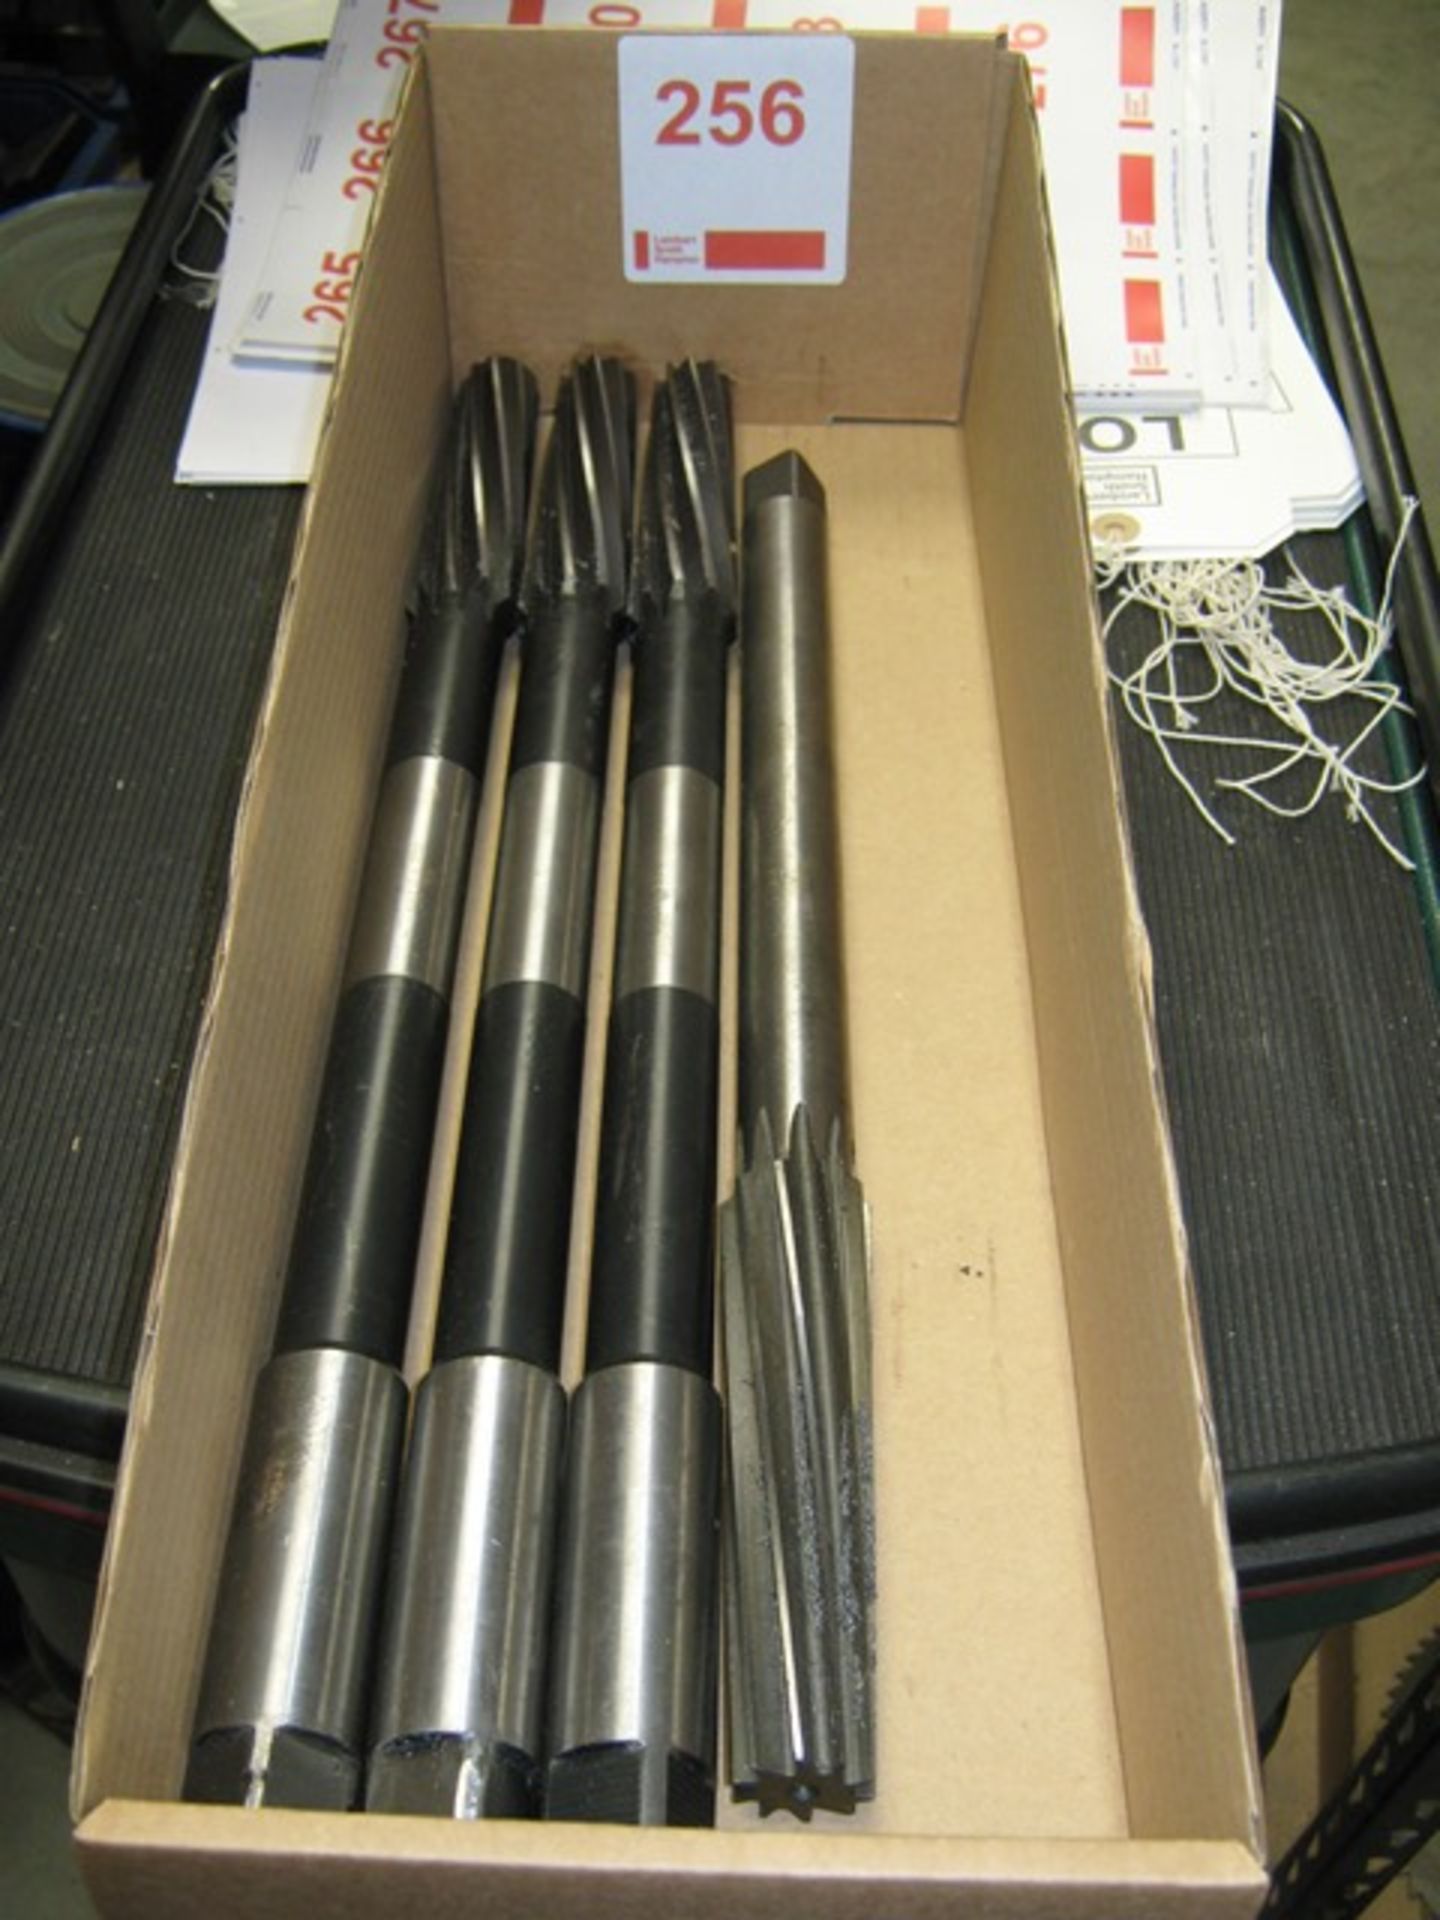 Four Straight Shank Taper Reamers